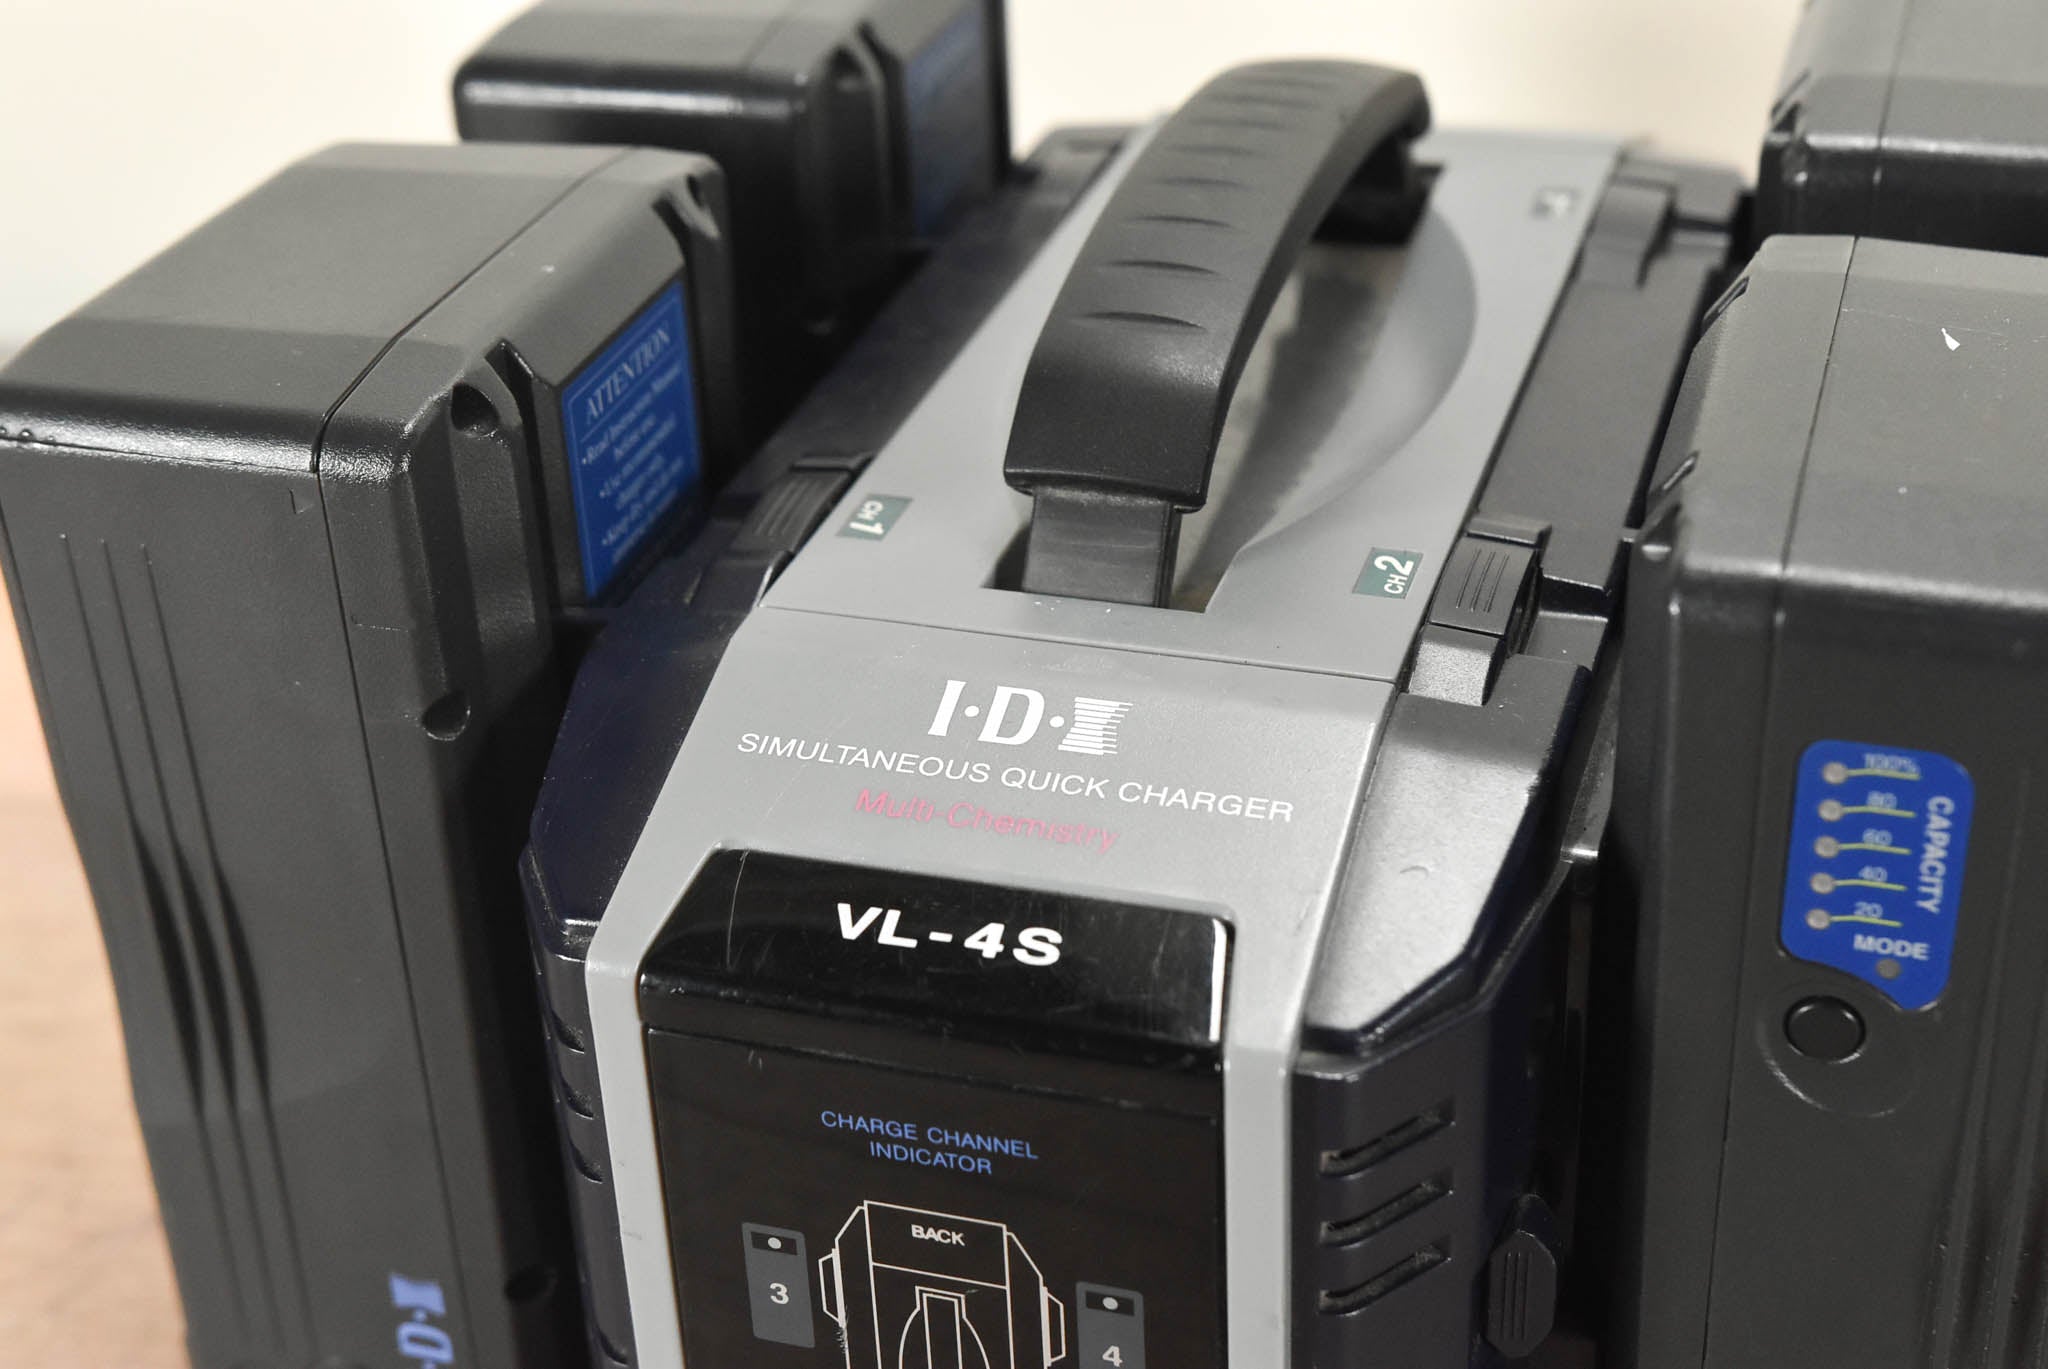 IDX System Technology VL-4S 4-Channel Charger with 4 Batteries